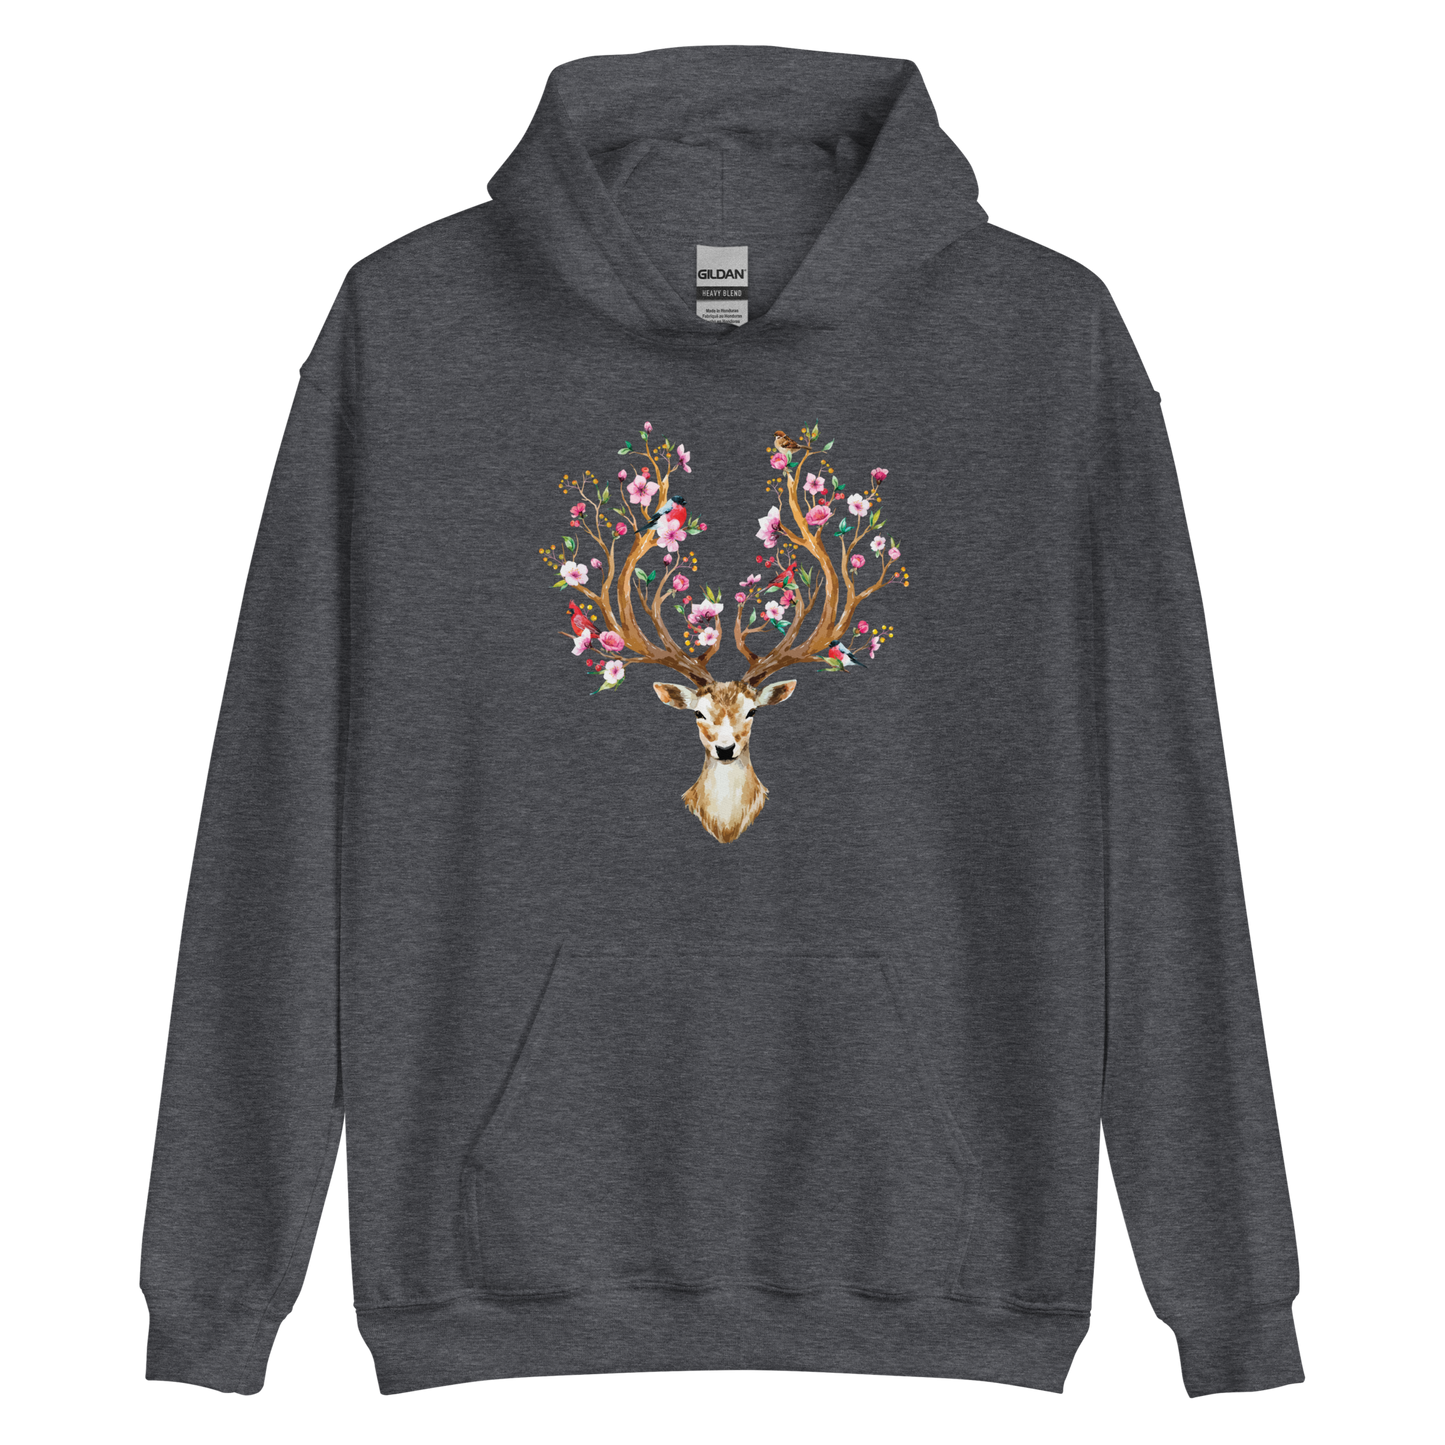 Dark Heather Floral Red Deer Hoodie featuring a captivating Floral Red Deer graphic on the chest - Cute Graphic Deer Hoodies - Boozy Fox